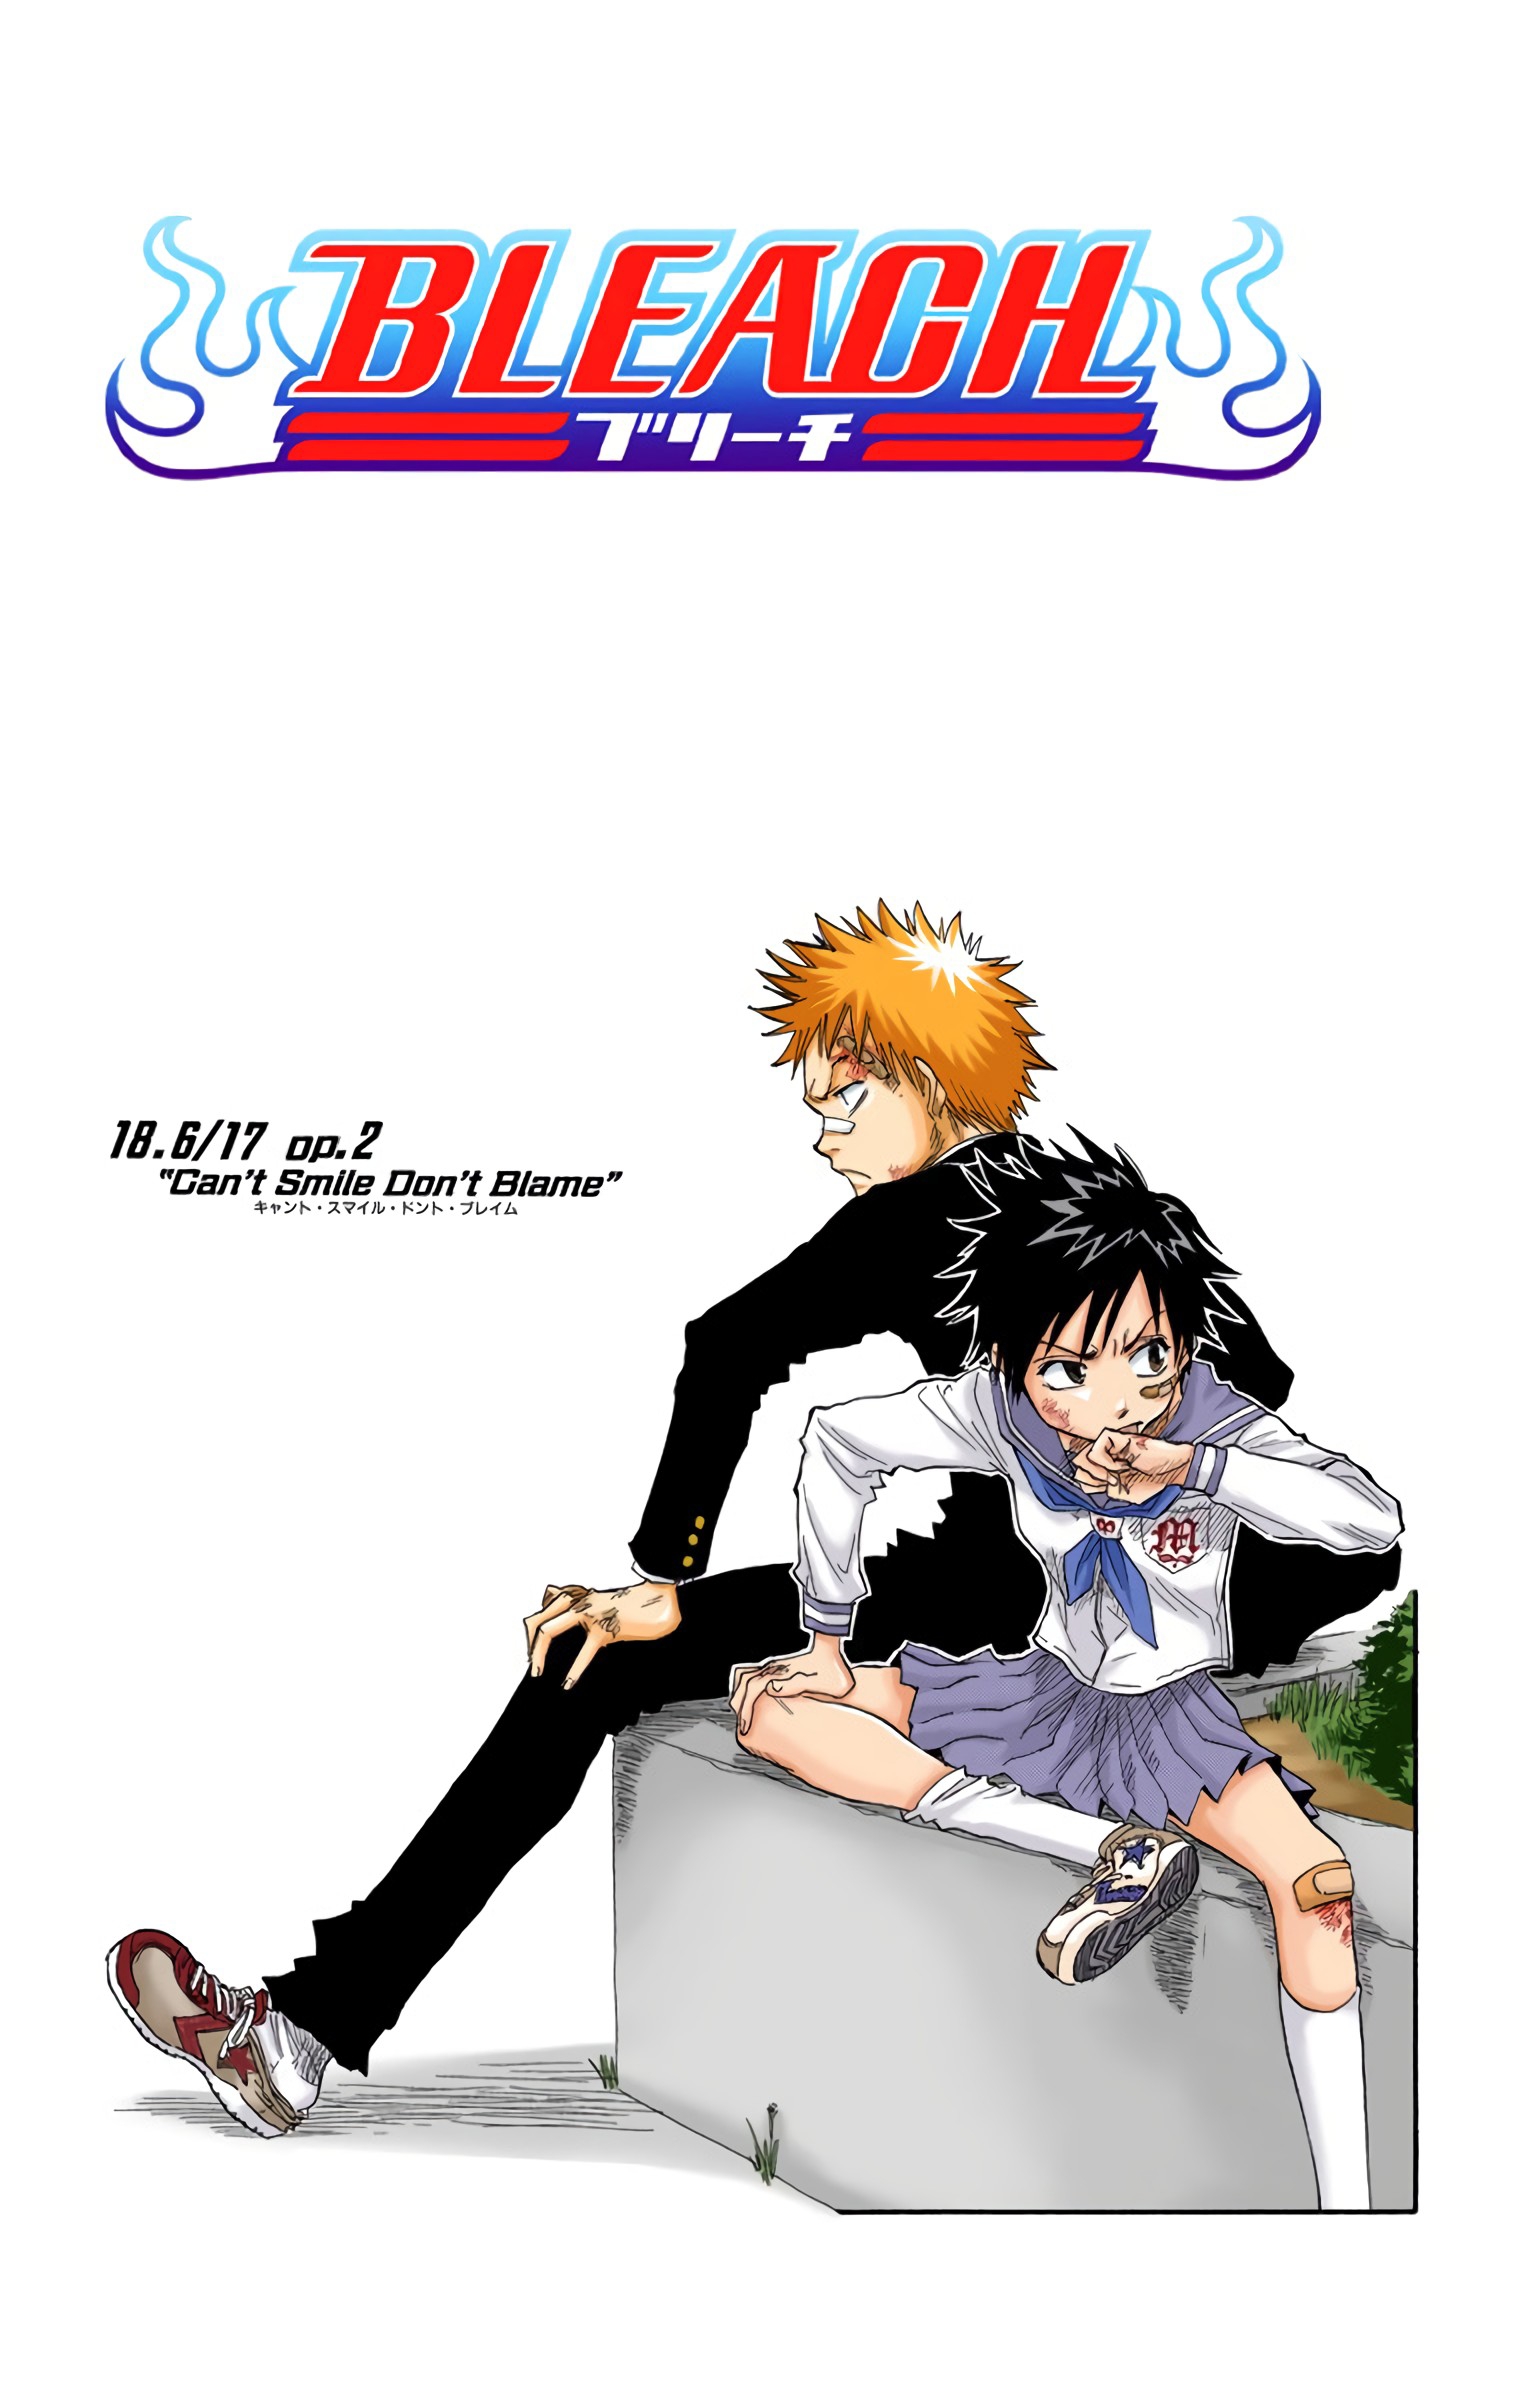 Bleach - Digital Colored Comics Vol.3 Chapter 18: 6/17 Op. 2 Doesn't Smile Much Anymore - Picture 2